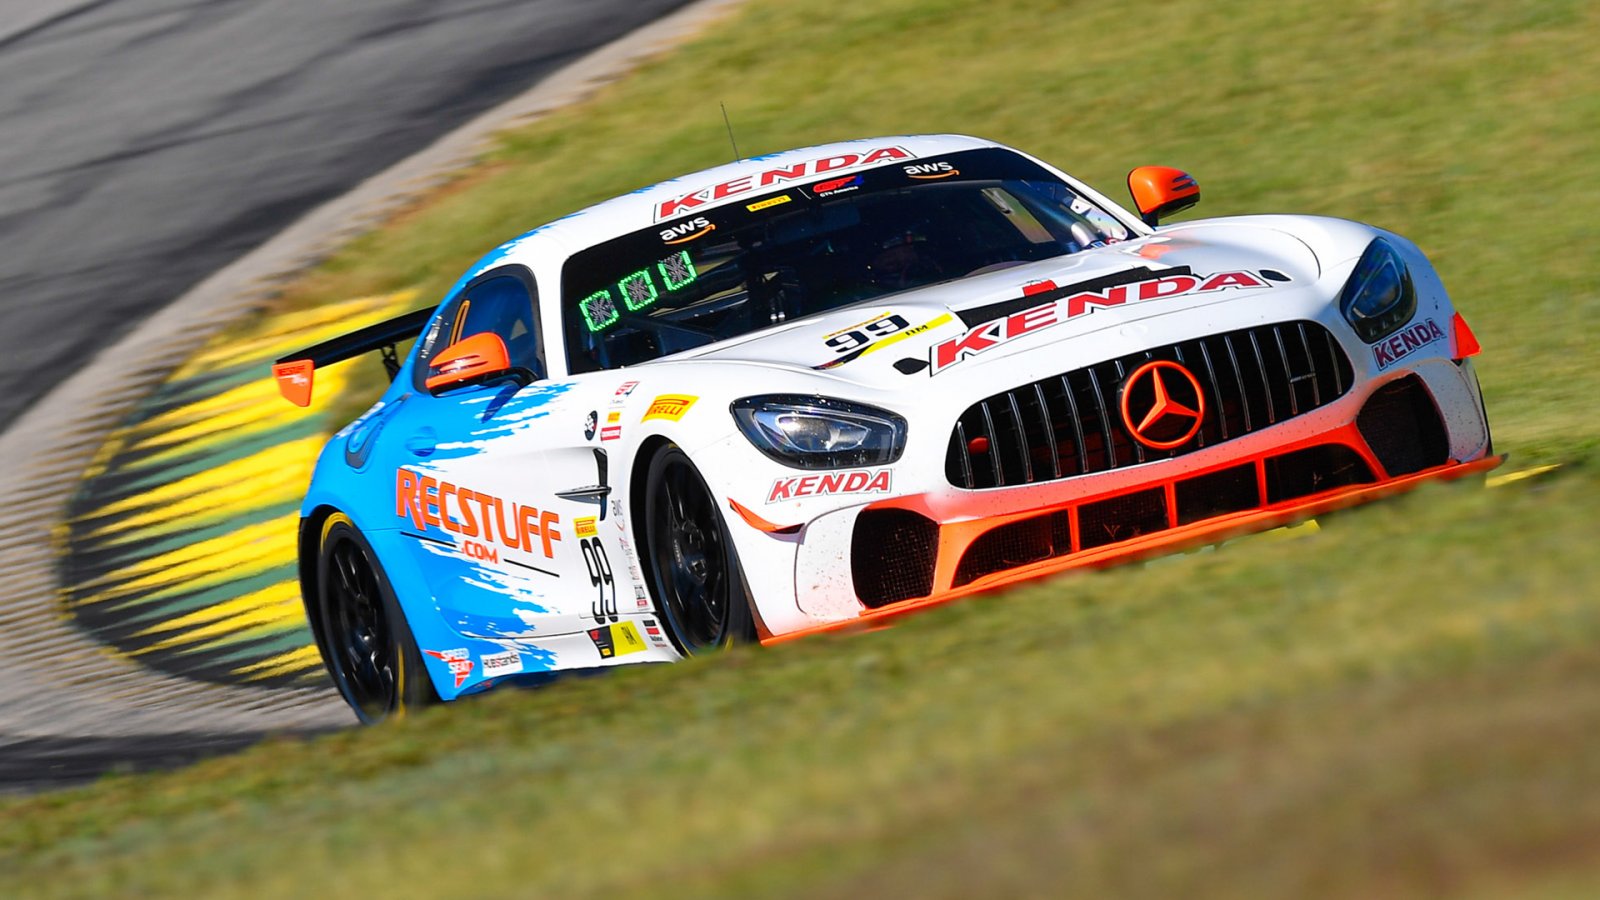 Veteran Courtney, RECSTUFF Racing back at home at Road America this Weekend in 3-Race SRO GT4 Sprints